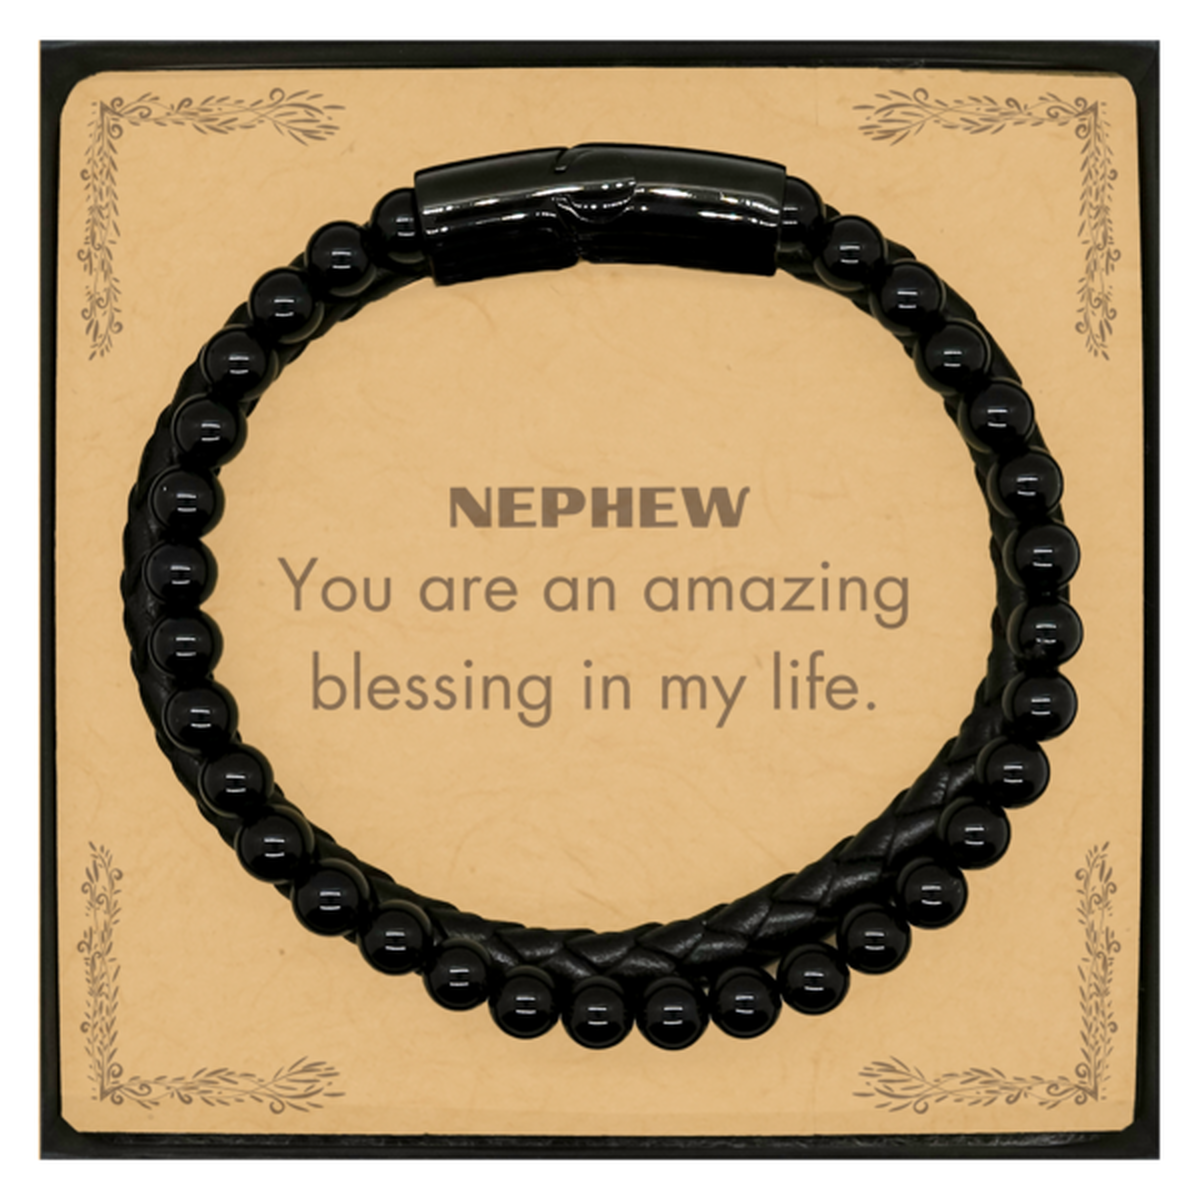 Nephew Stone Leather Bracelets, You are an amazing blessing in my life, Thank You Gifts For Nephew, Inspirational Birthday Christmas Unique Gifts For Nephew